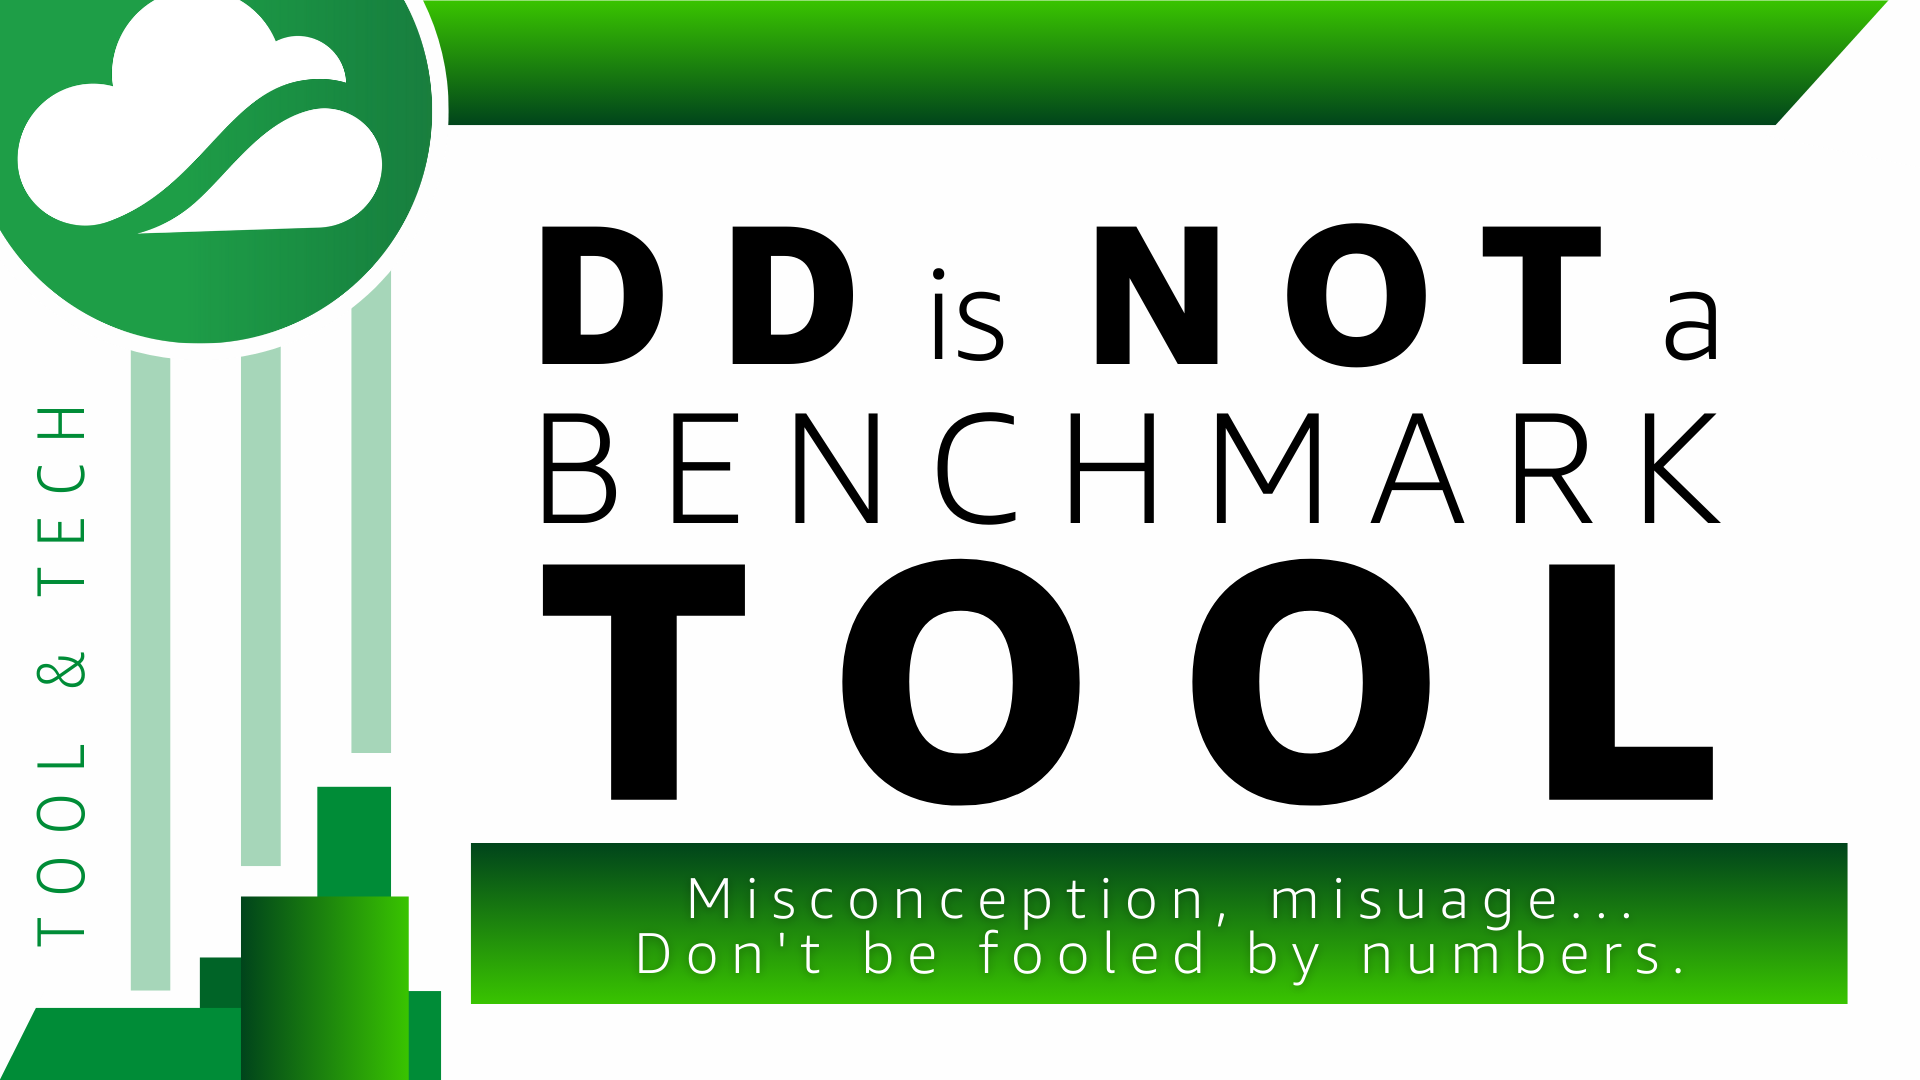 dd is not a benchmarking tool